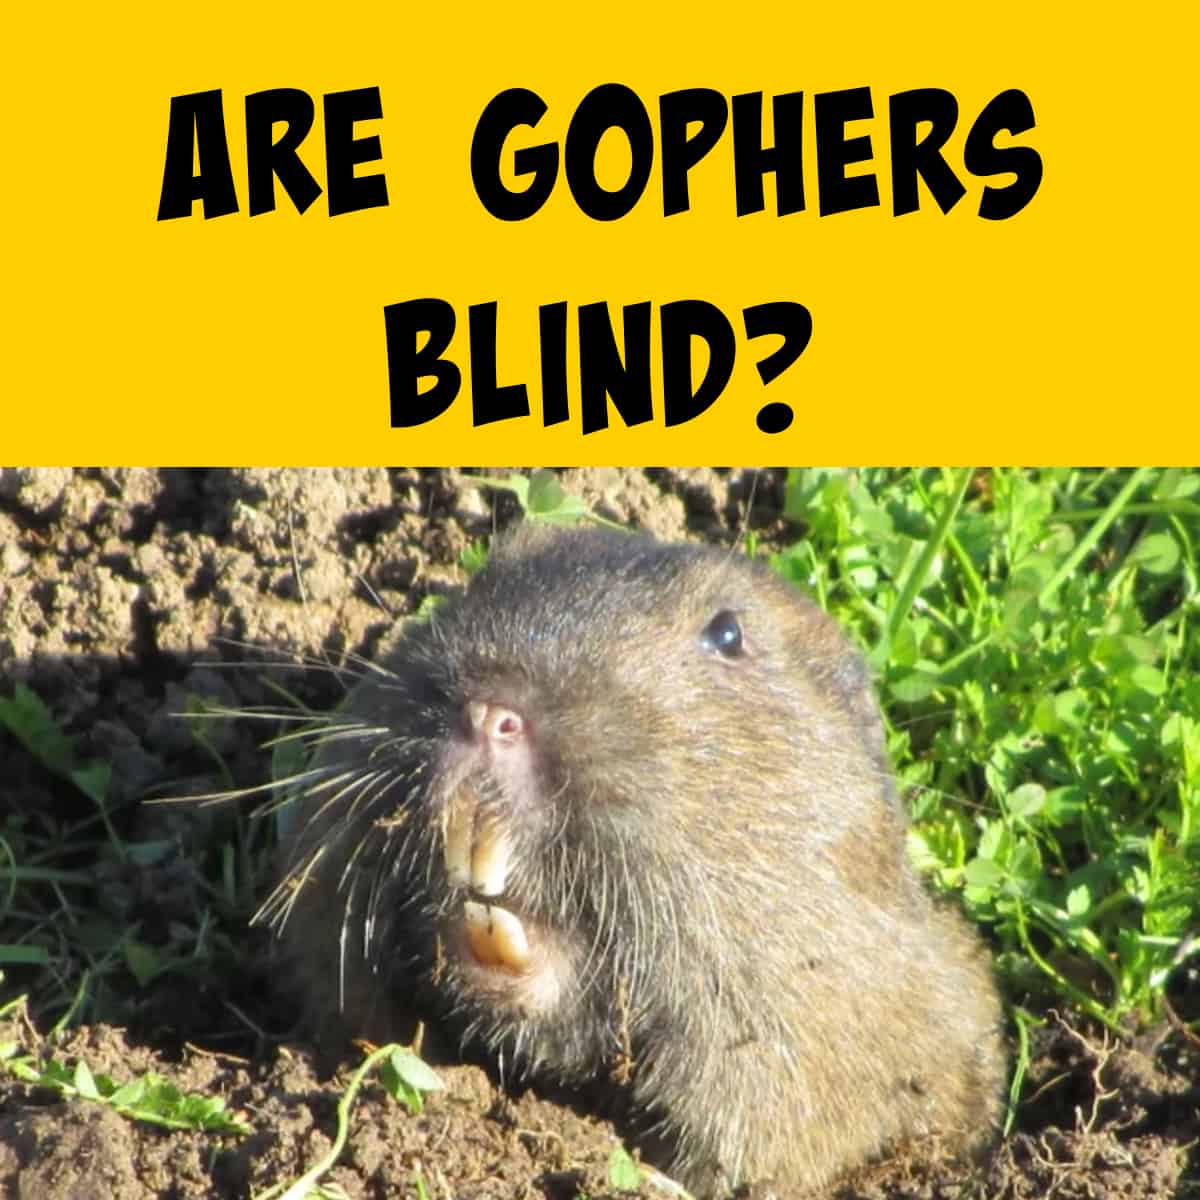 Face of a gopher